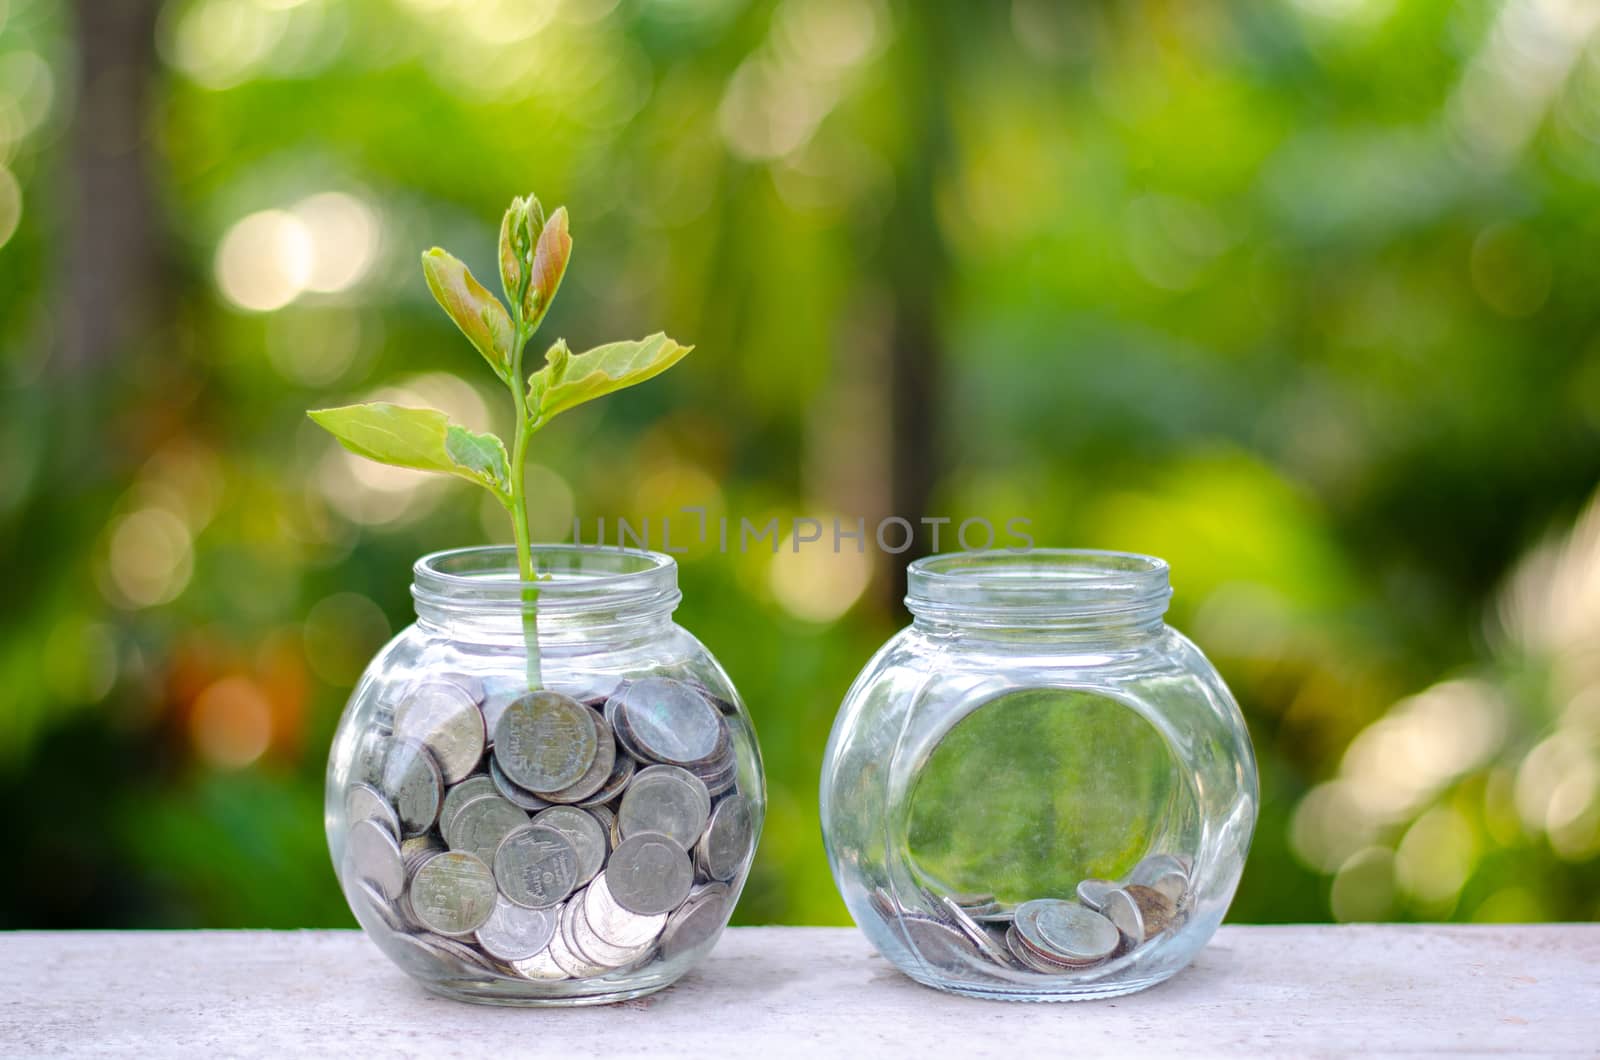 Coin tree Glass Jar Plant growing from coins outside the glass jar on blurred green natural background money saving and investment financial concept by sarayut_thaneerat